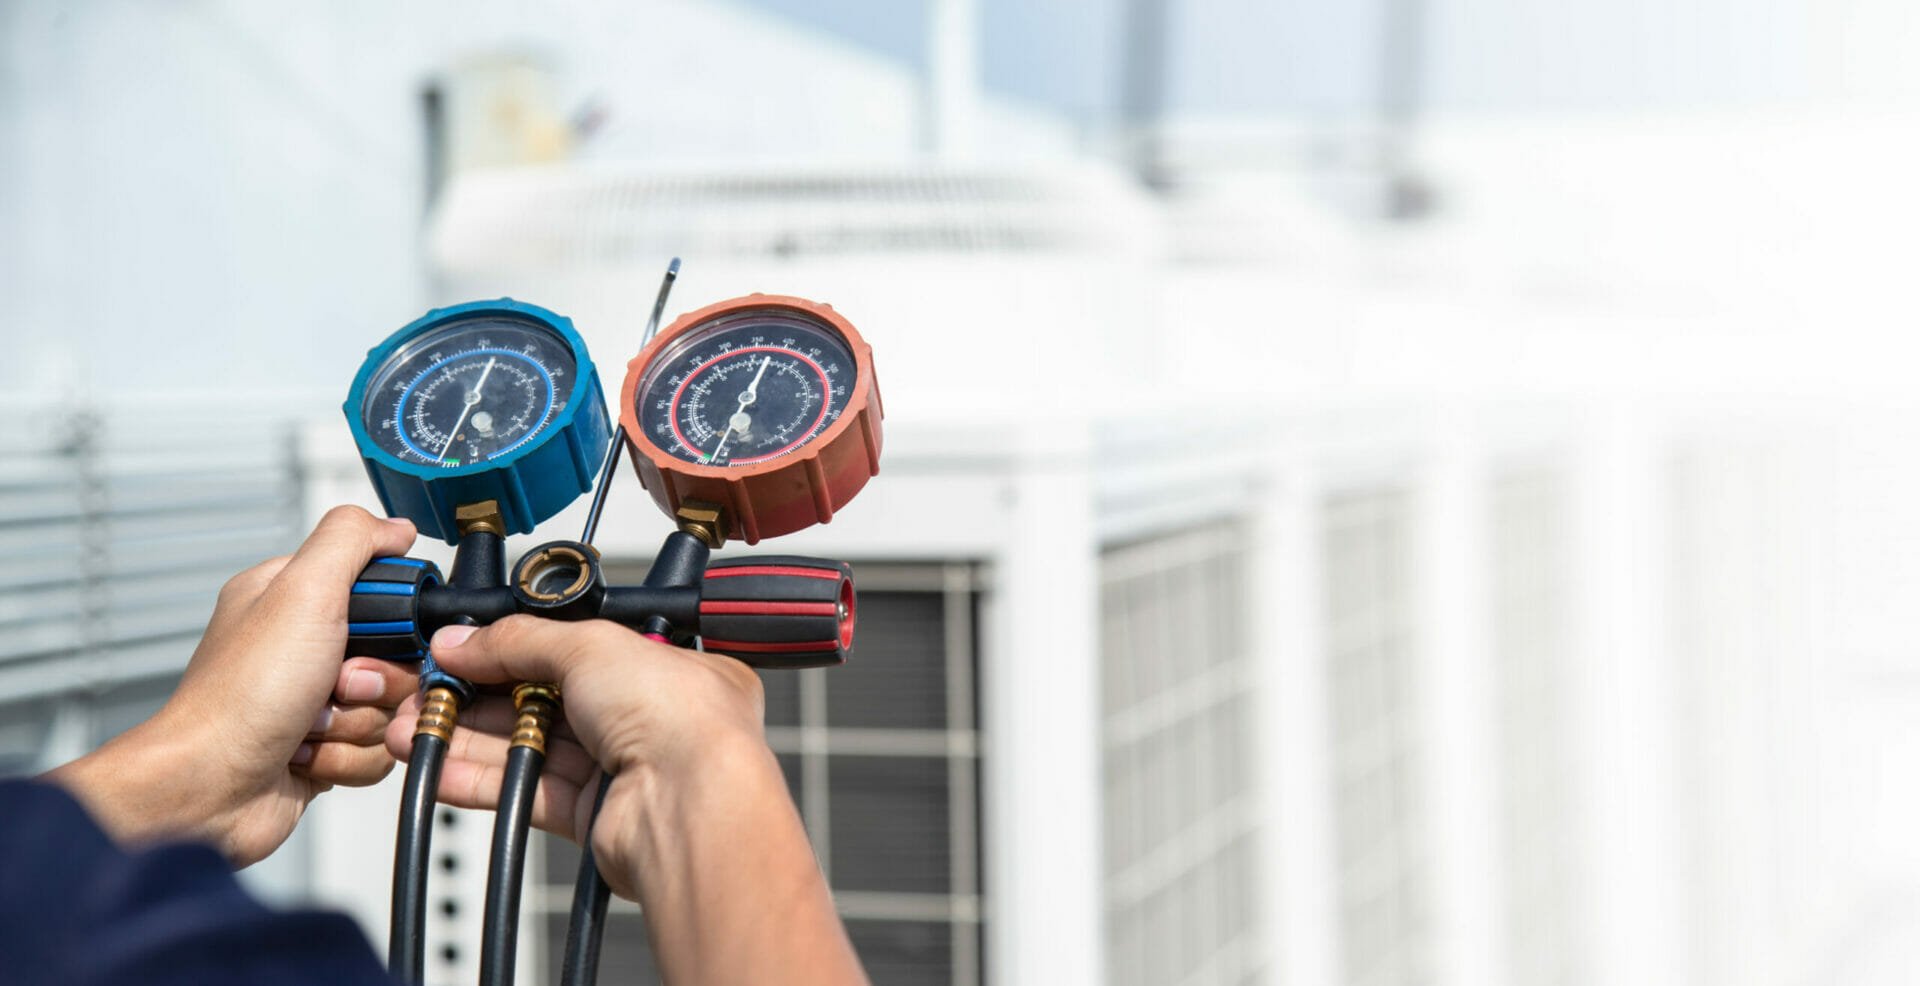 technician is checking air conditioner measuring equipment filling air conditioners service maintenance air conditioner scaled - HVAC -